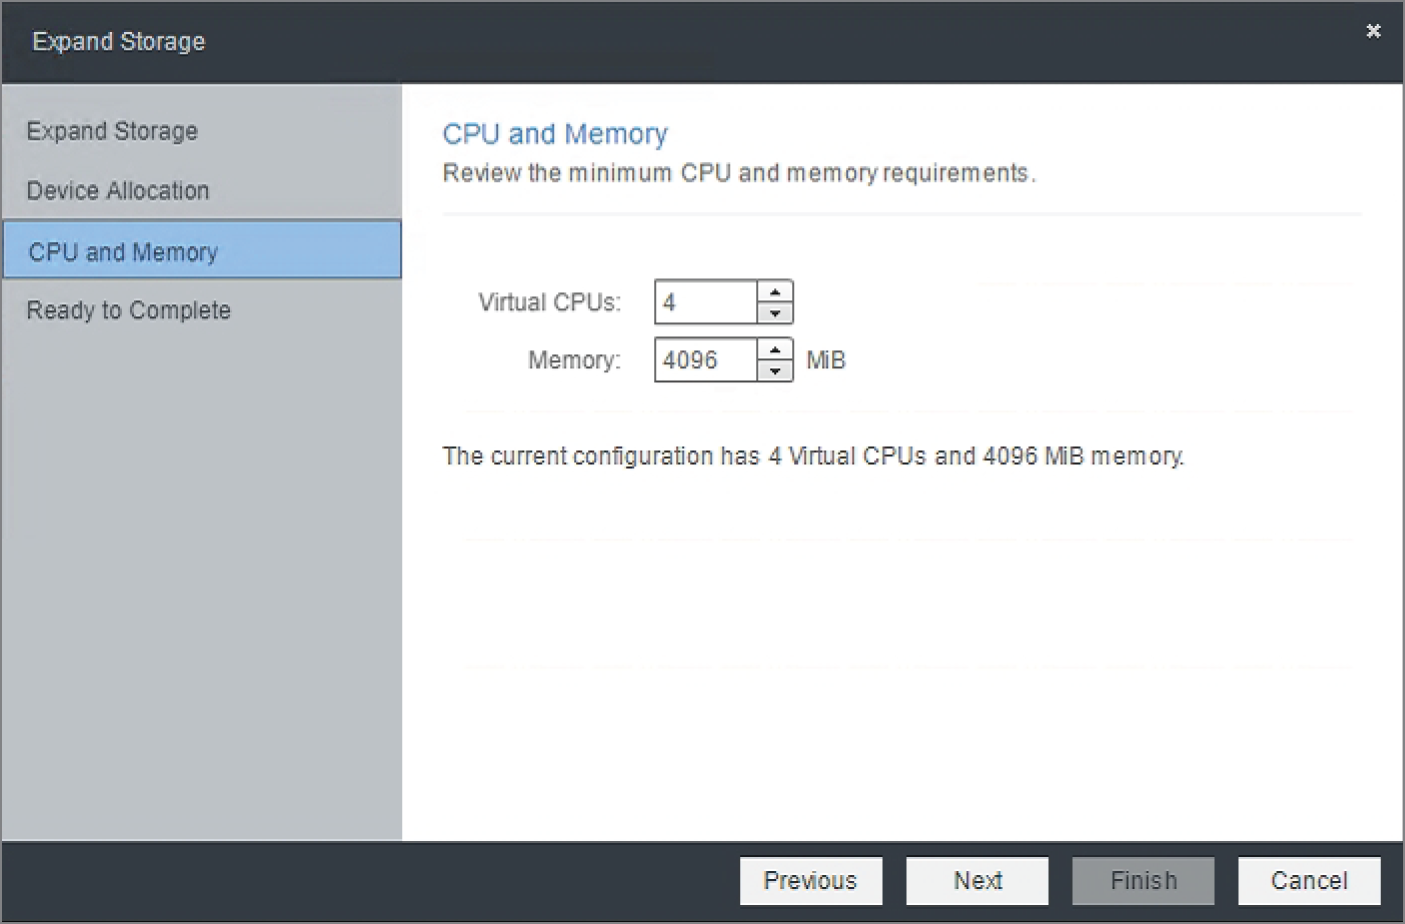 Snapshot of changing the RAM setting for the VDP appliance.